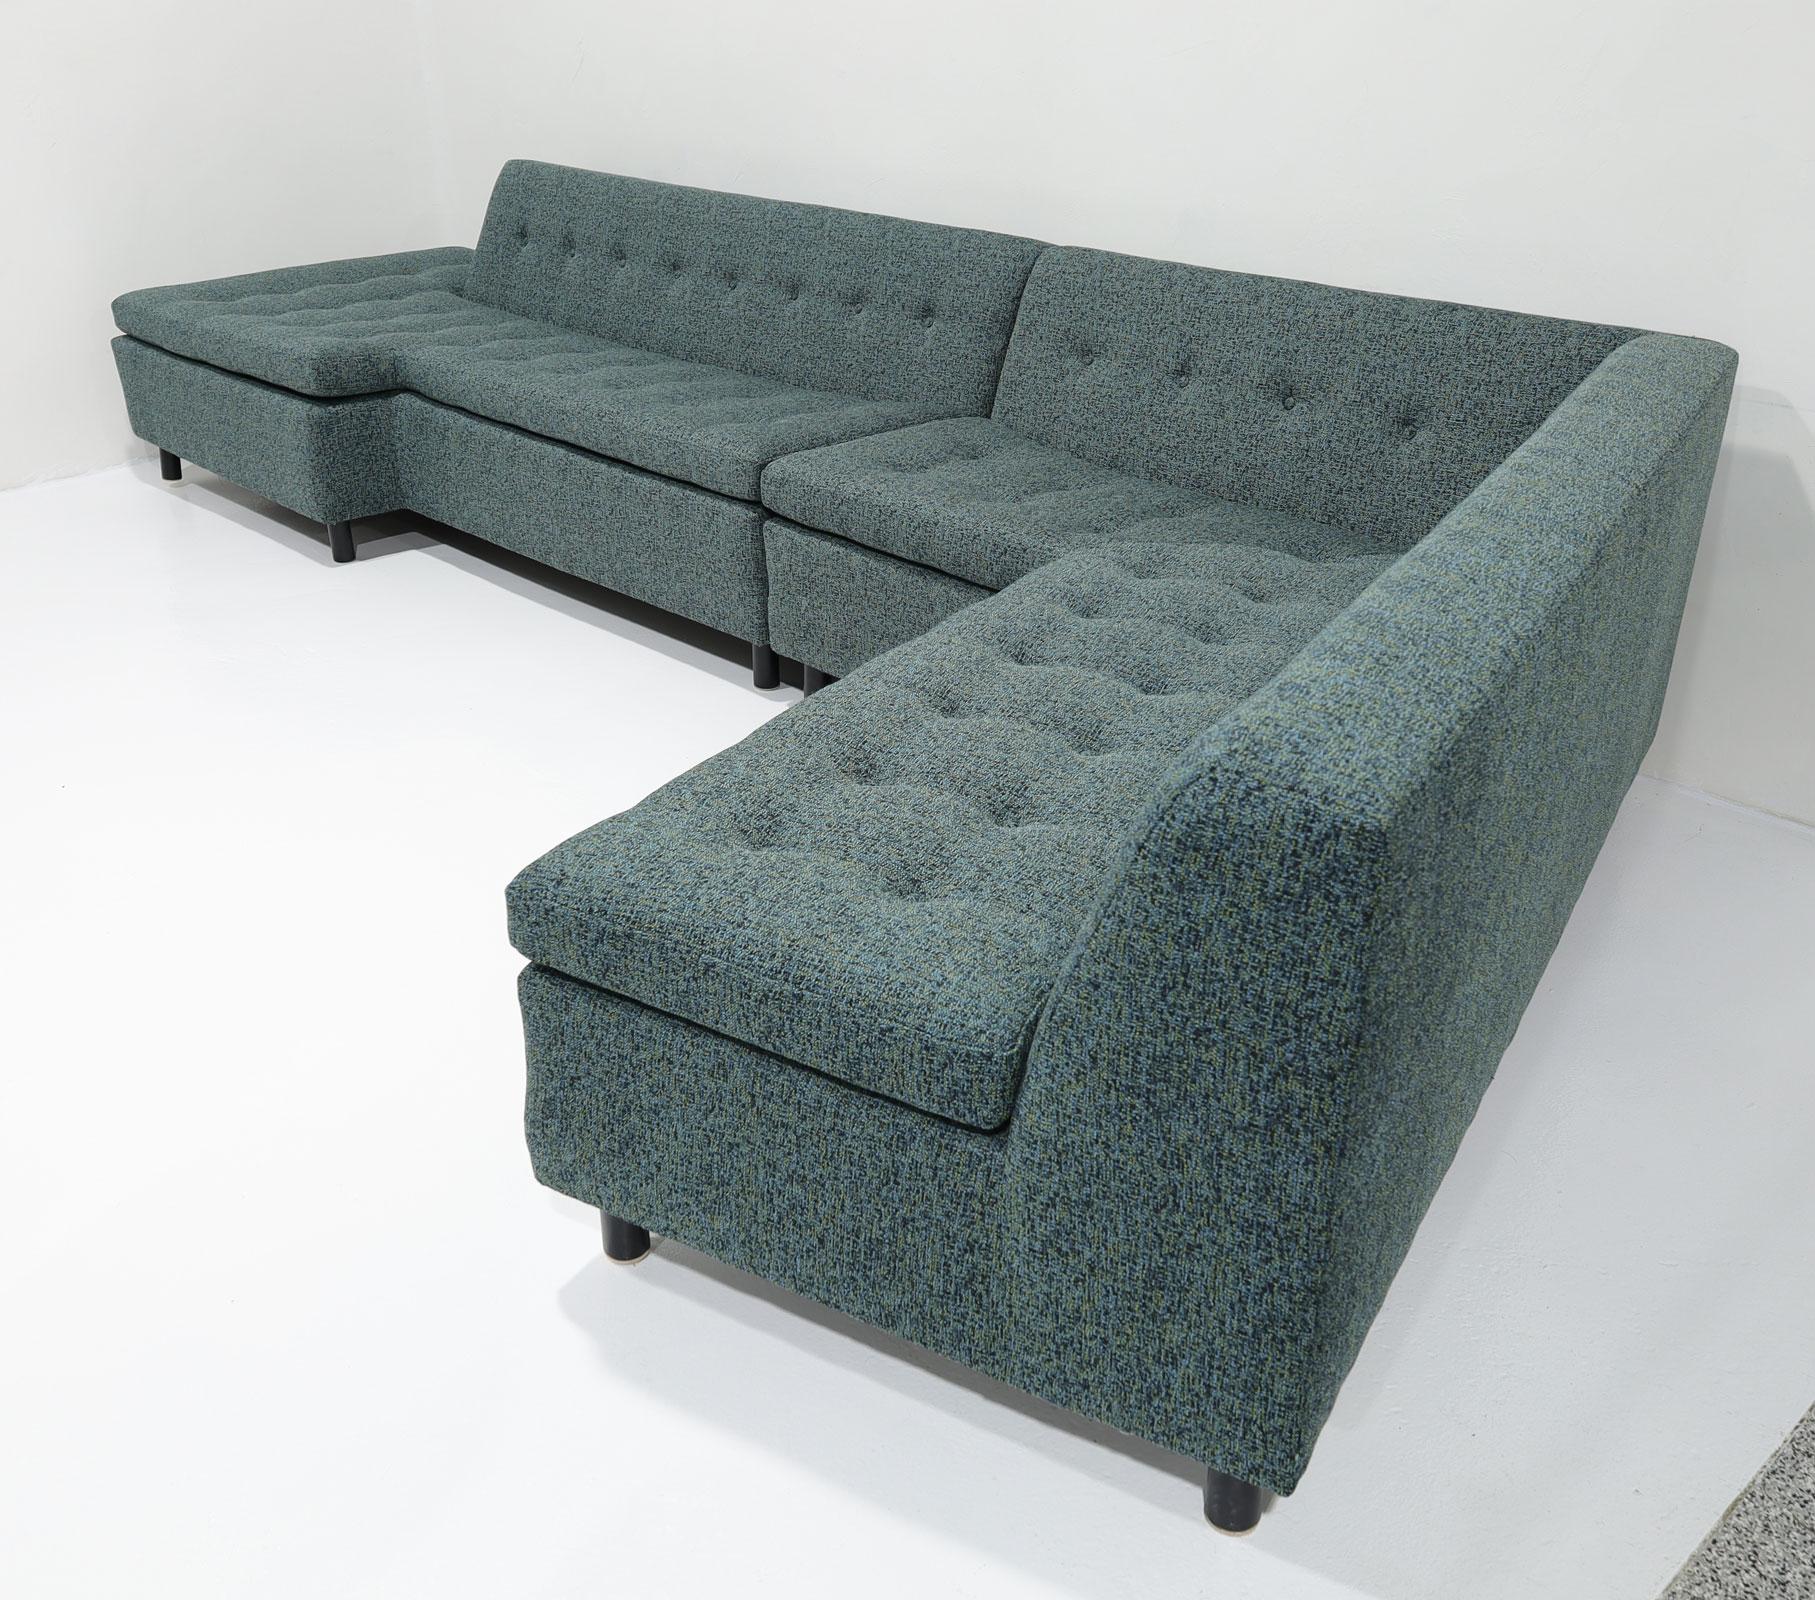 A stunning two-part sofa by Harvey Probber. We have reupholstered in a rich tight weave wool that enhances the clean lines of this beautiful sofa. The individual sections measure 88